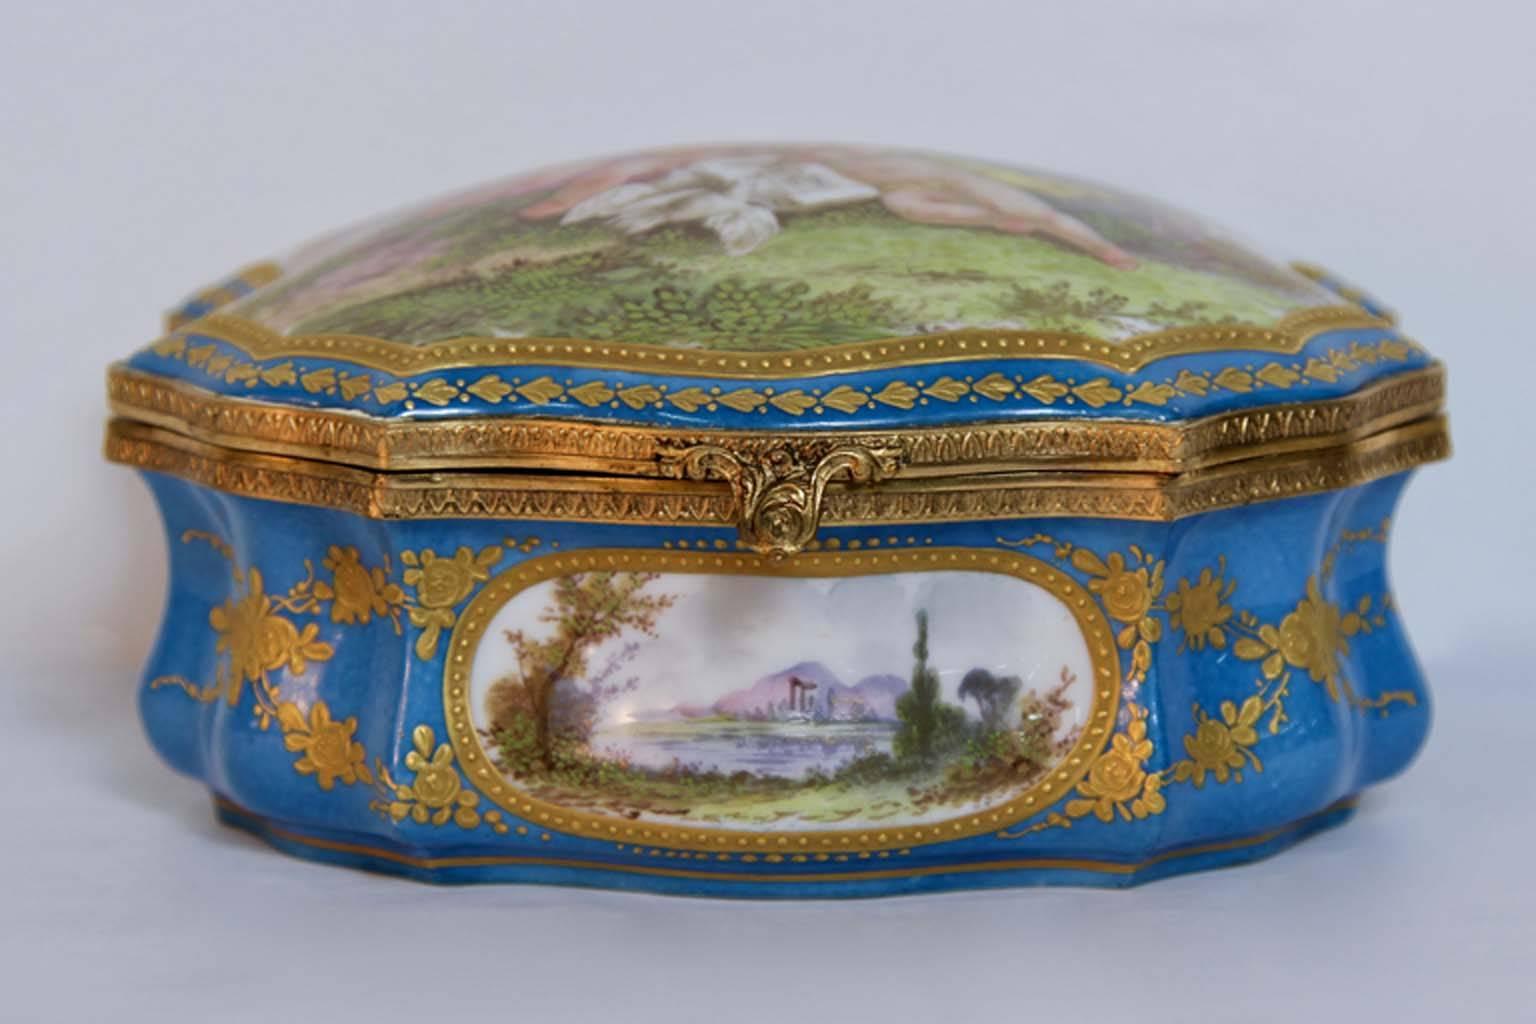 A very rare Sèvres Porcelain jewel box Bonbonniere, circa 1800. Having hand-painted seen of French country sides as well as nude putti playing in the pastures. Rich raised gold applications in the Classic serves celeste blue color. Sèvres mark